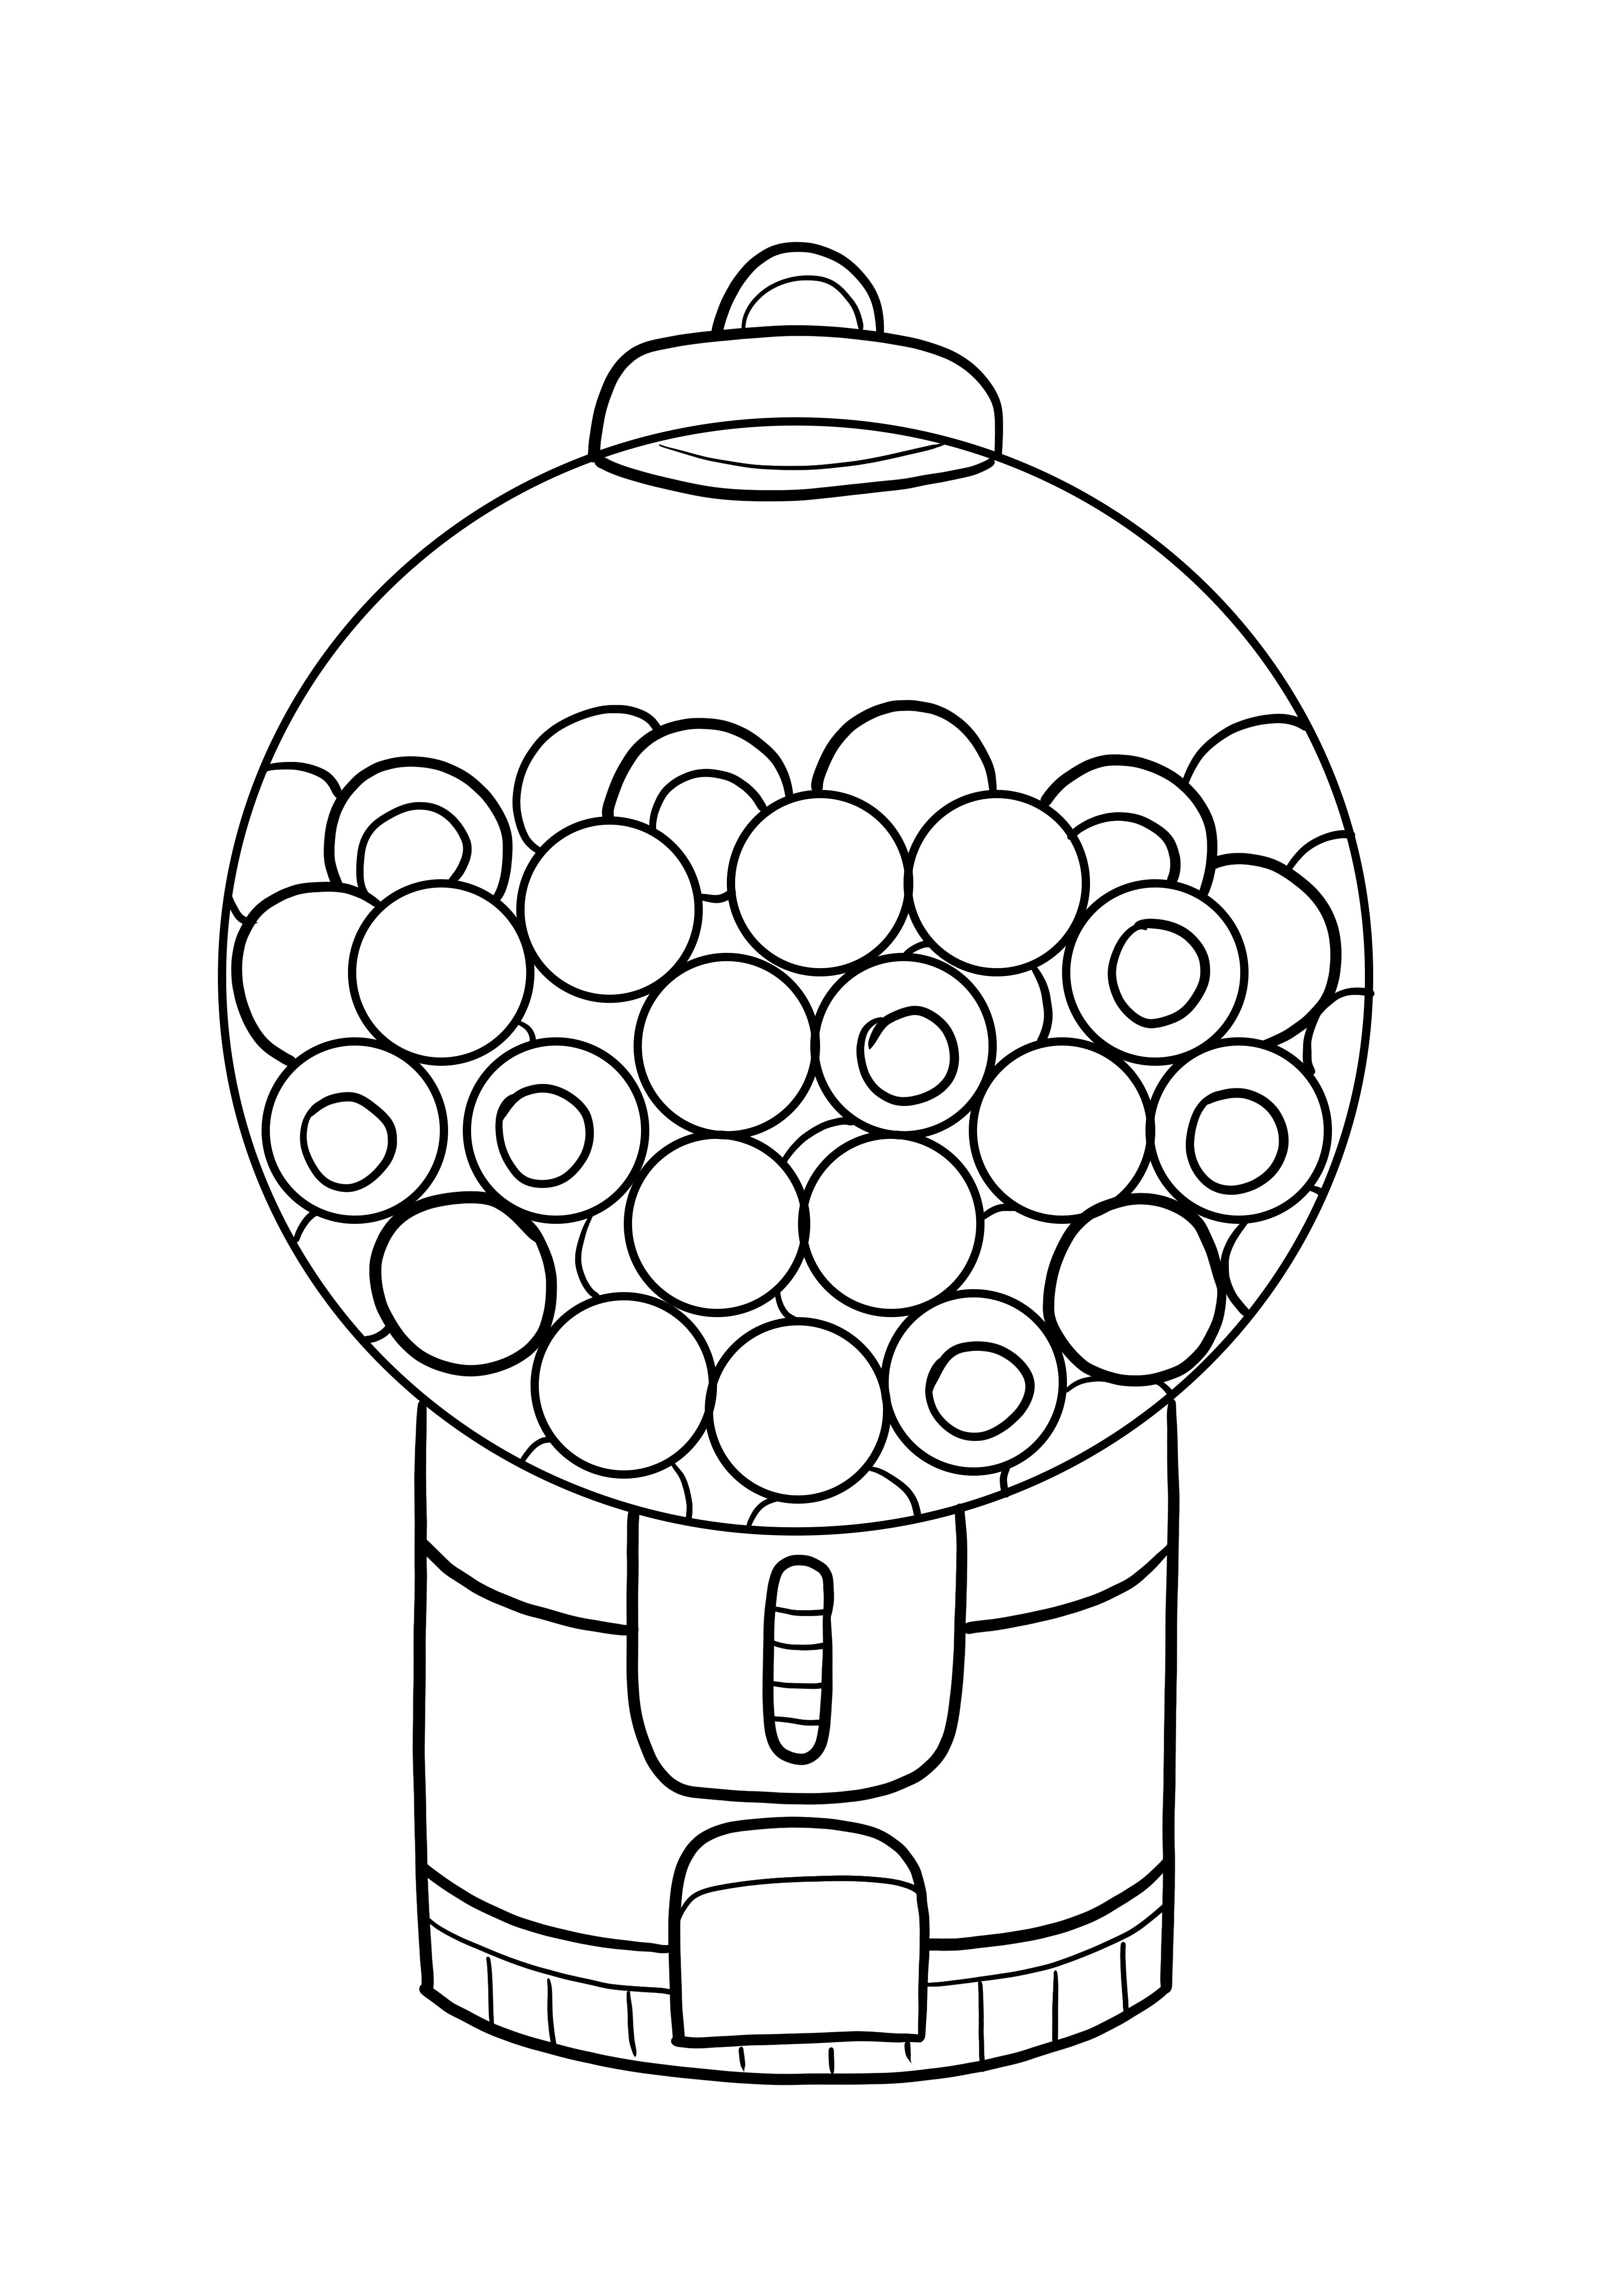 gumball machine coloring page